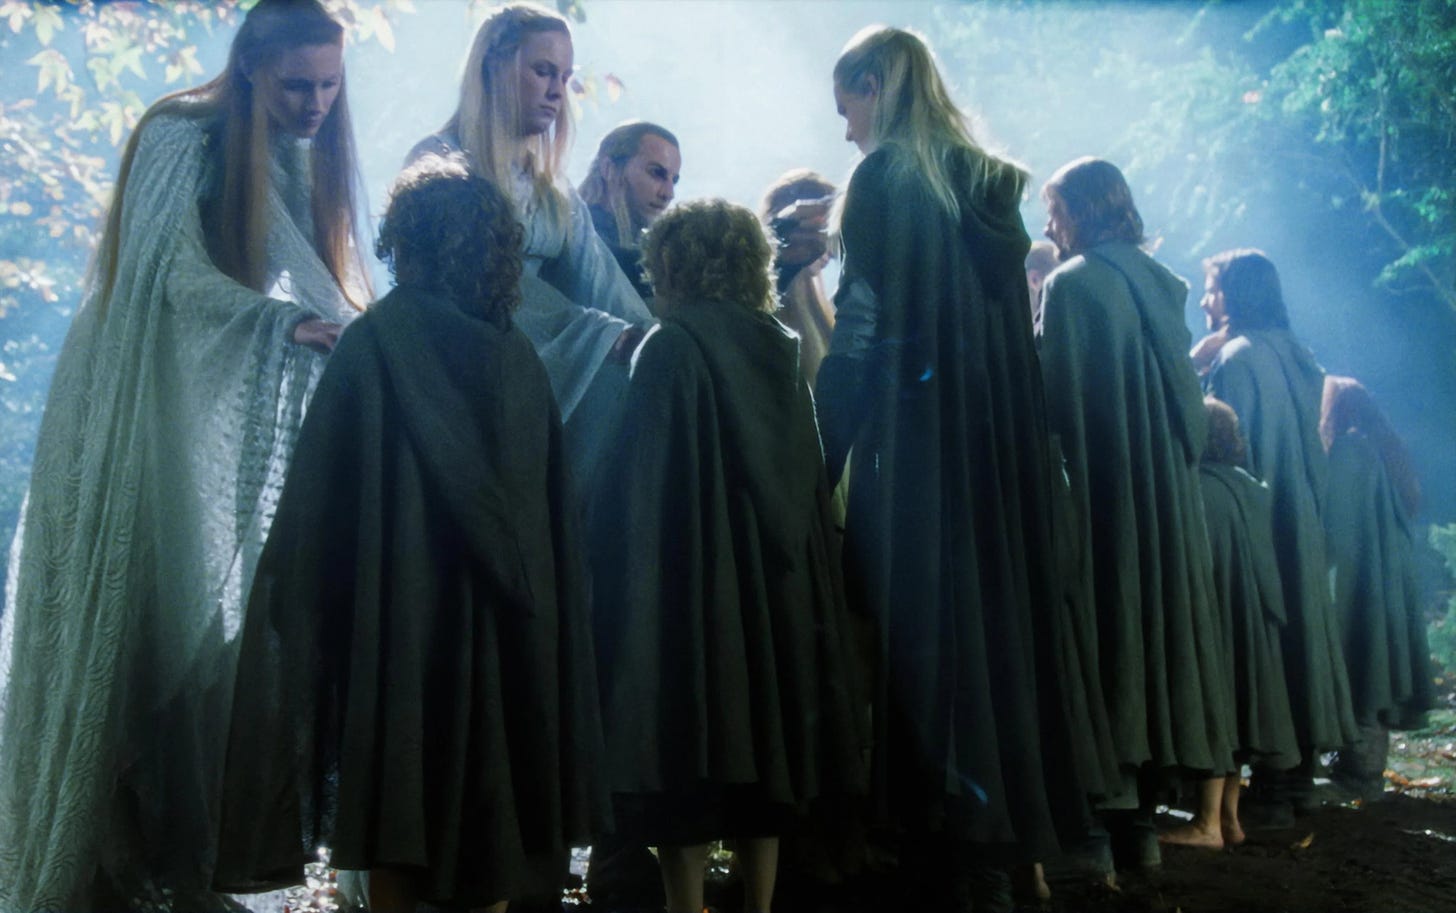 The Fellowship receiving their gifts from Galadriel